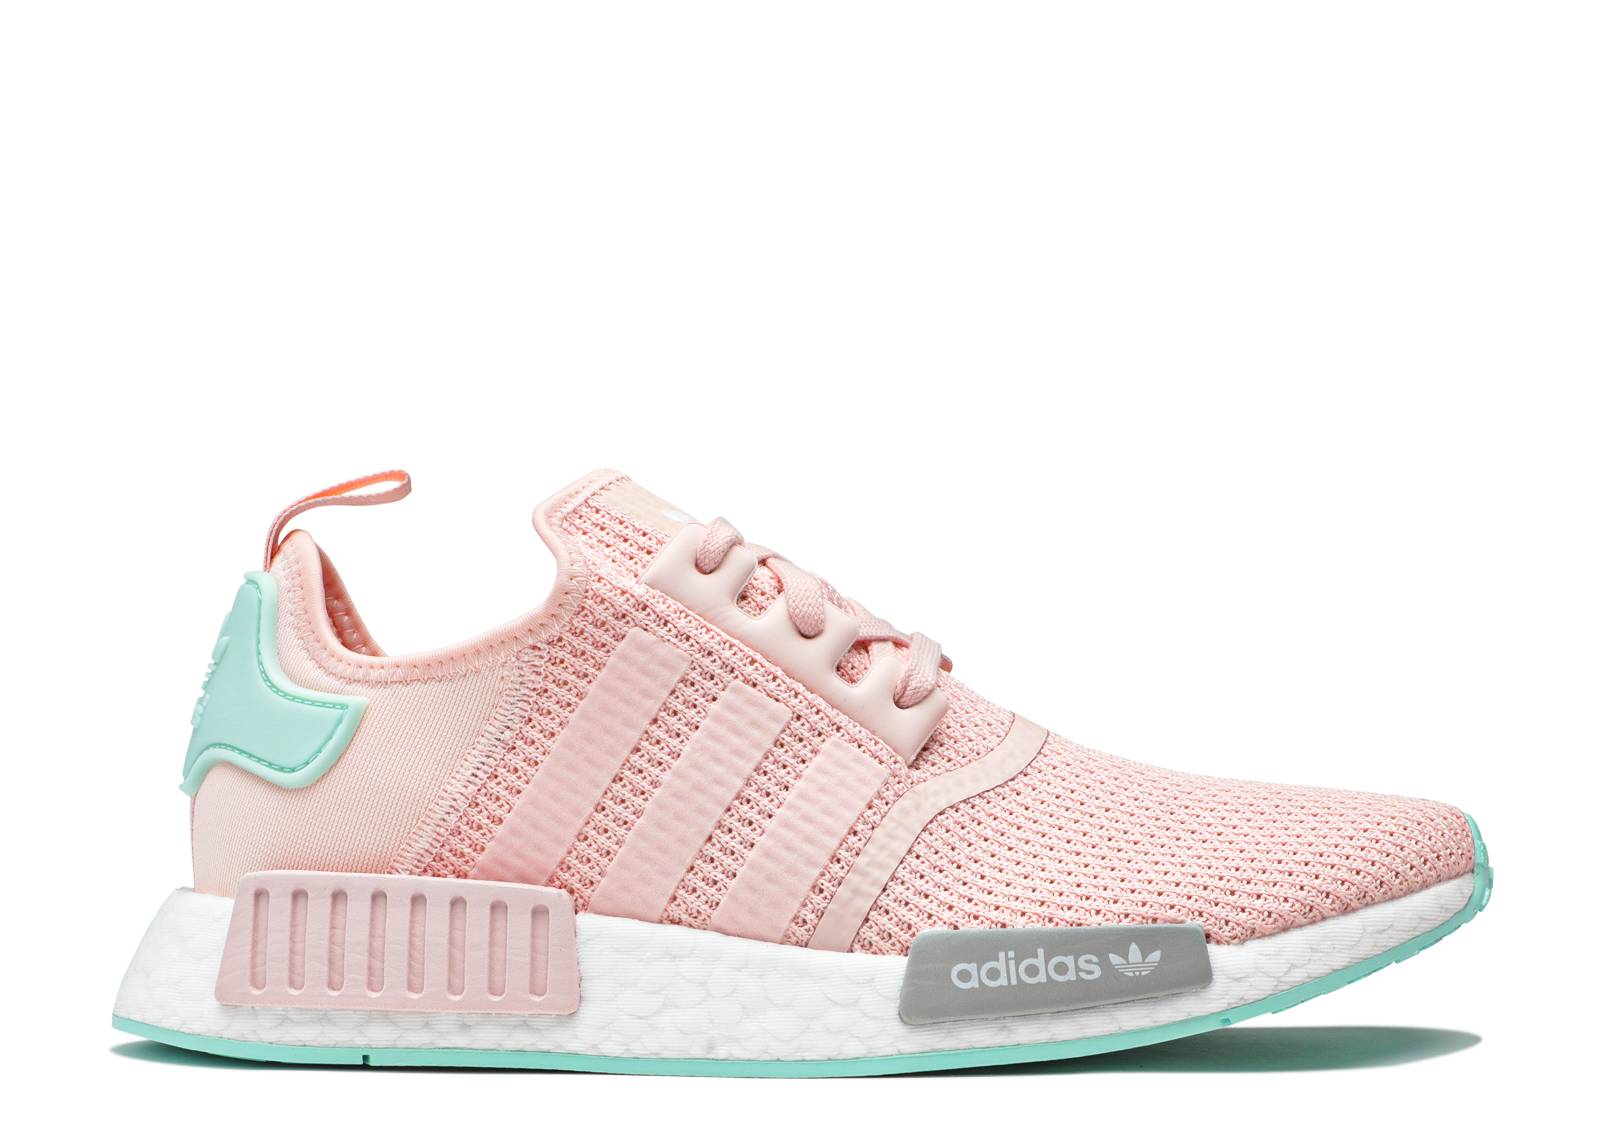 Wmns NMD_R1 'Icey Pink Mint'